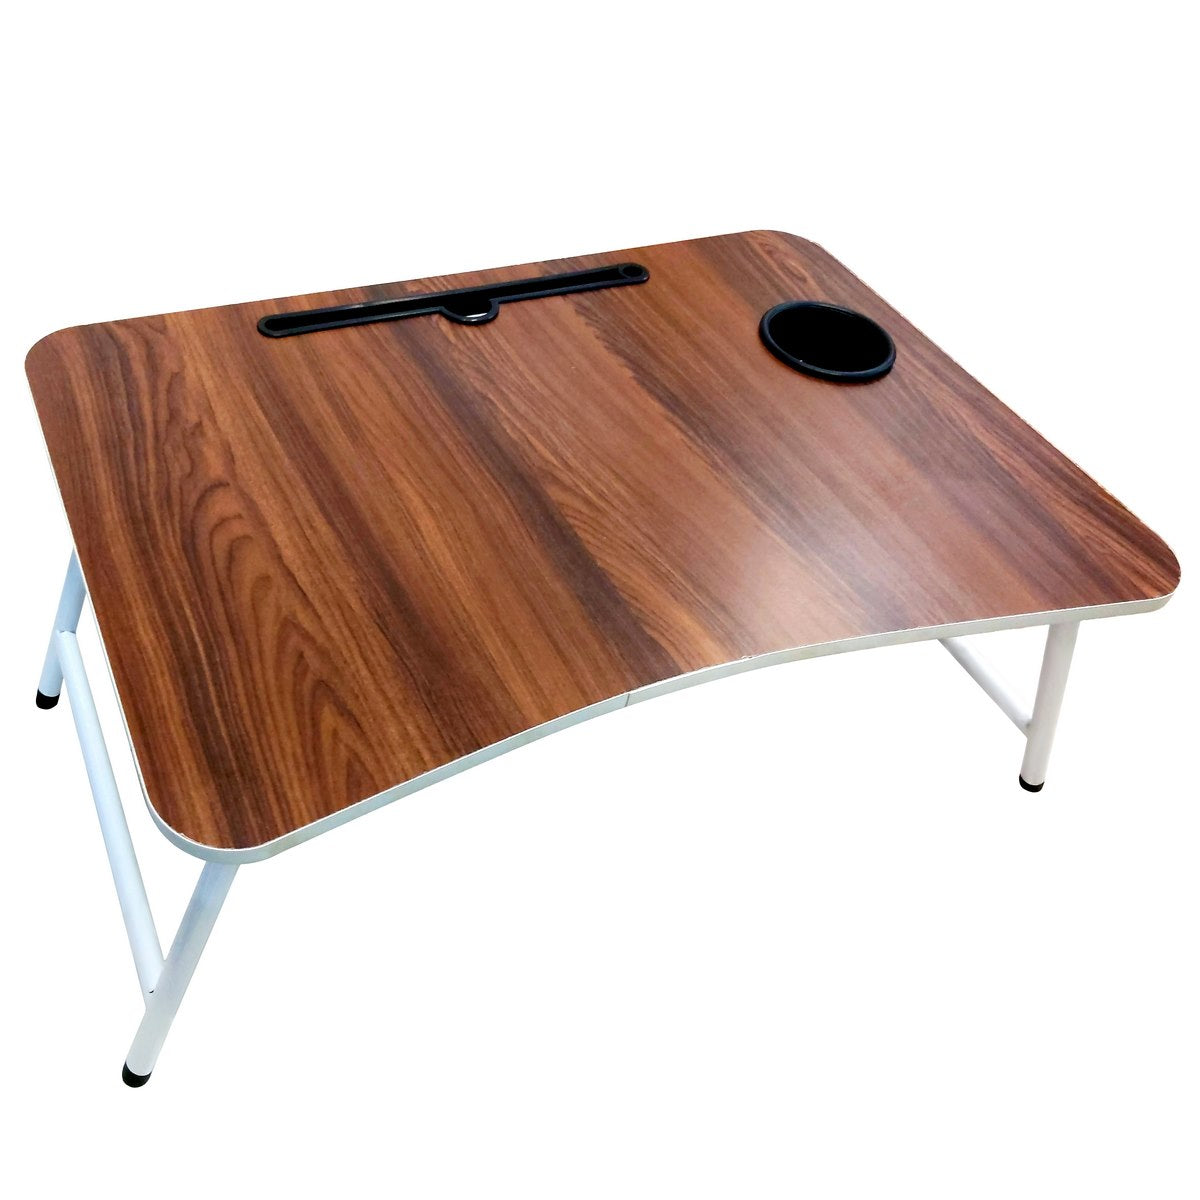 Folding Wooden Laptop Desk Table - For Office Use, Personal Use, Students Study Table, Corporate Gifting